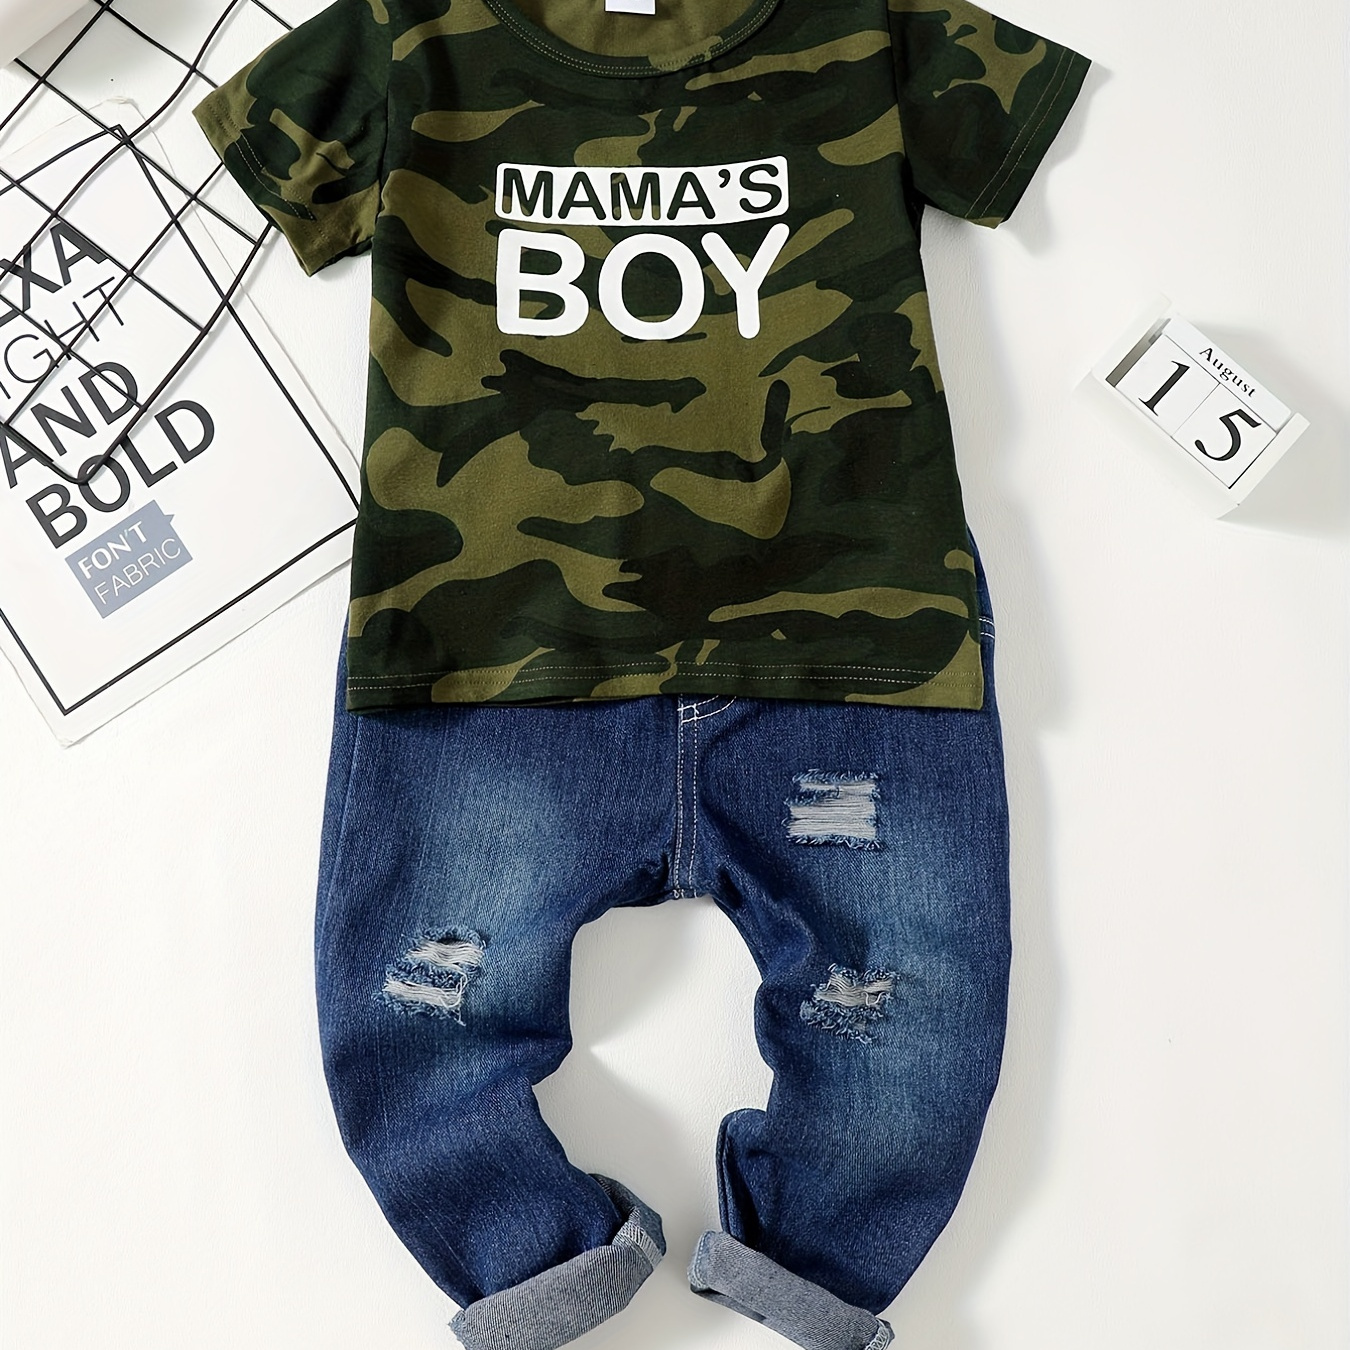 

Boys Camouflage Mama's Boy Letter Print T-shirt + Ripped Jeans Set, Cotton Comfy Fashion Clothes